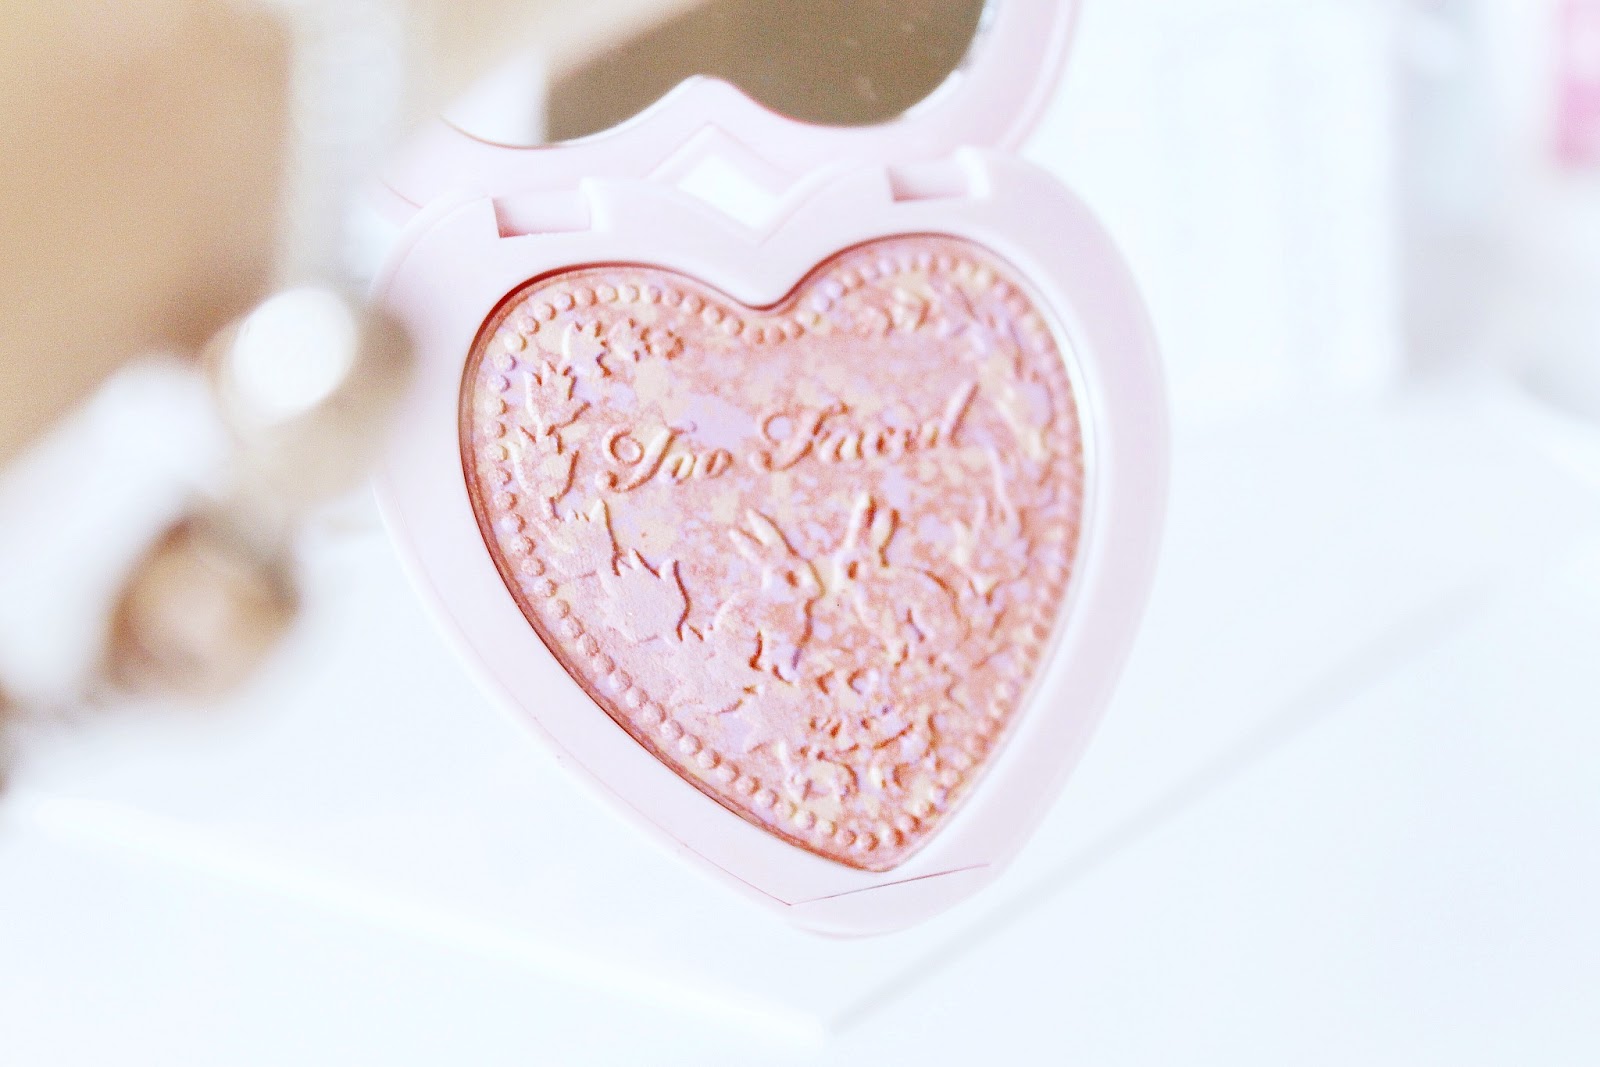 Too Faced Funfetti Love Fool review